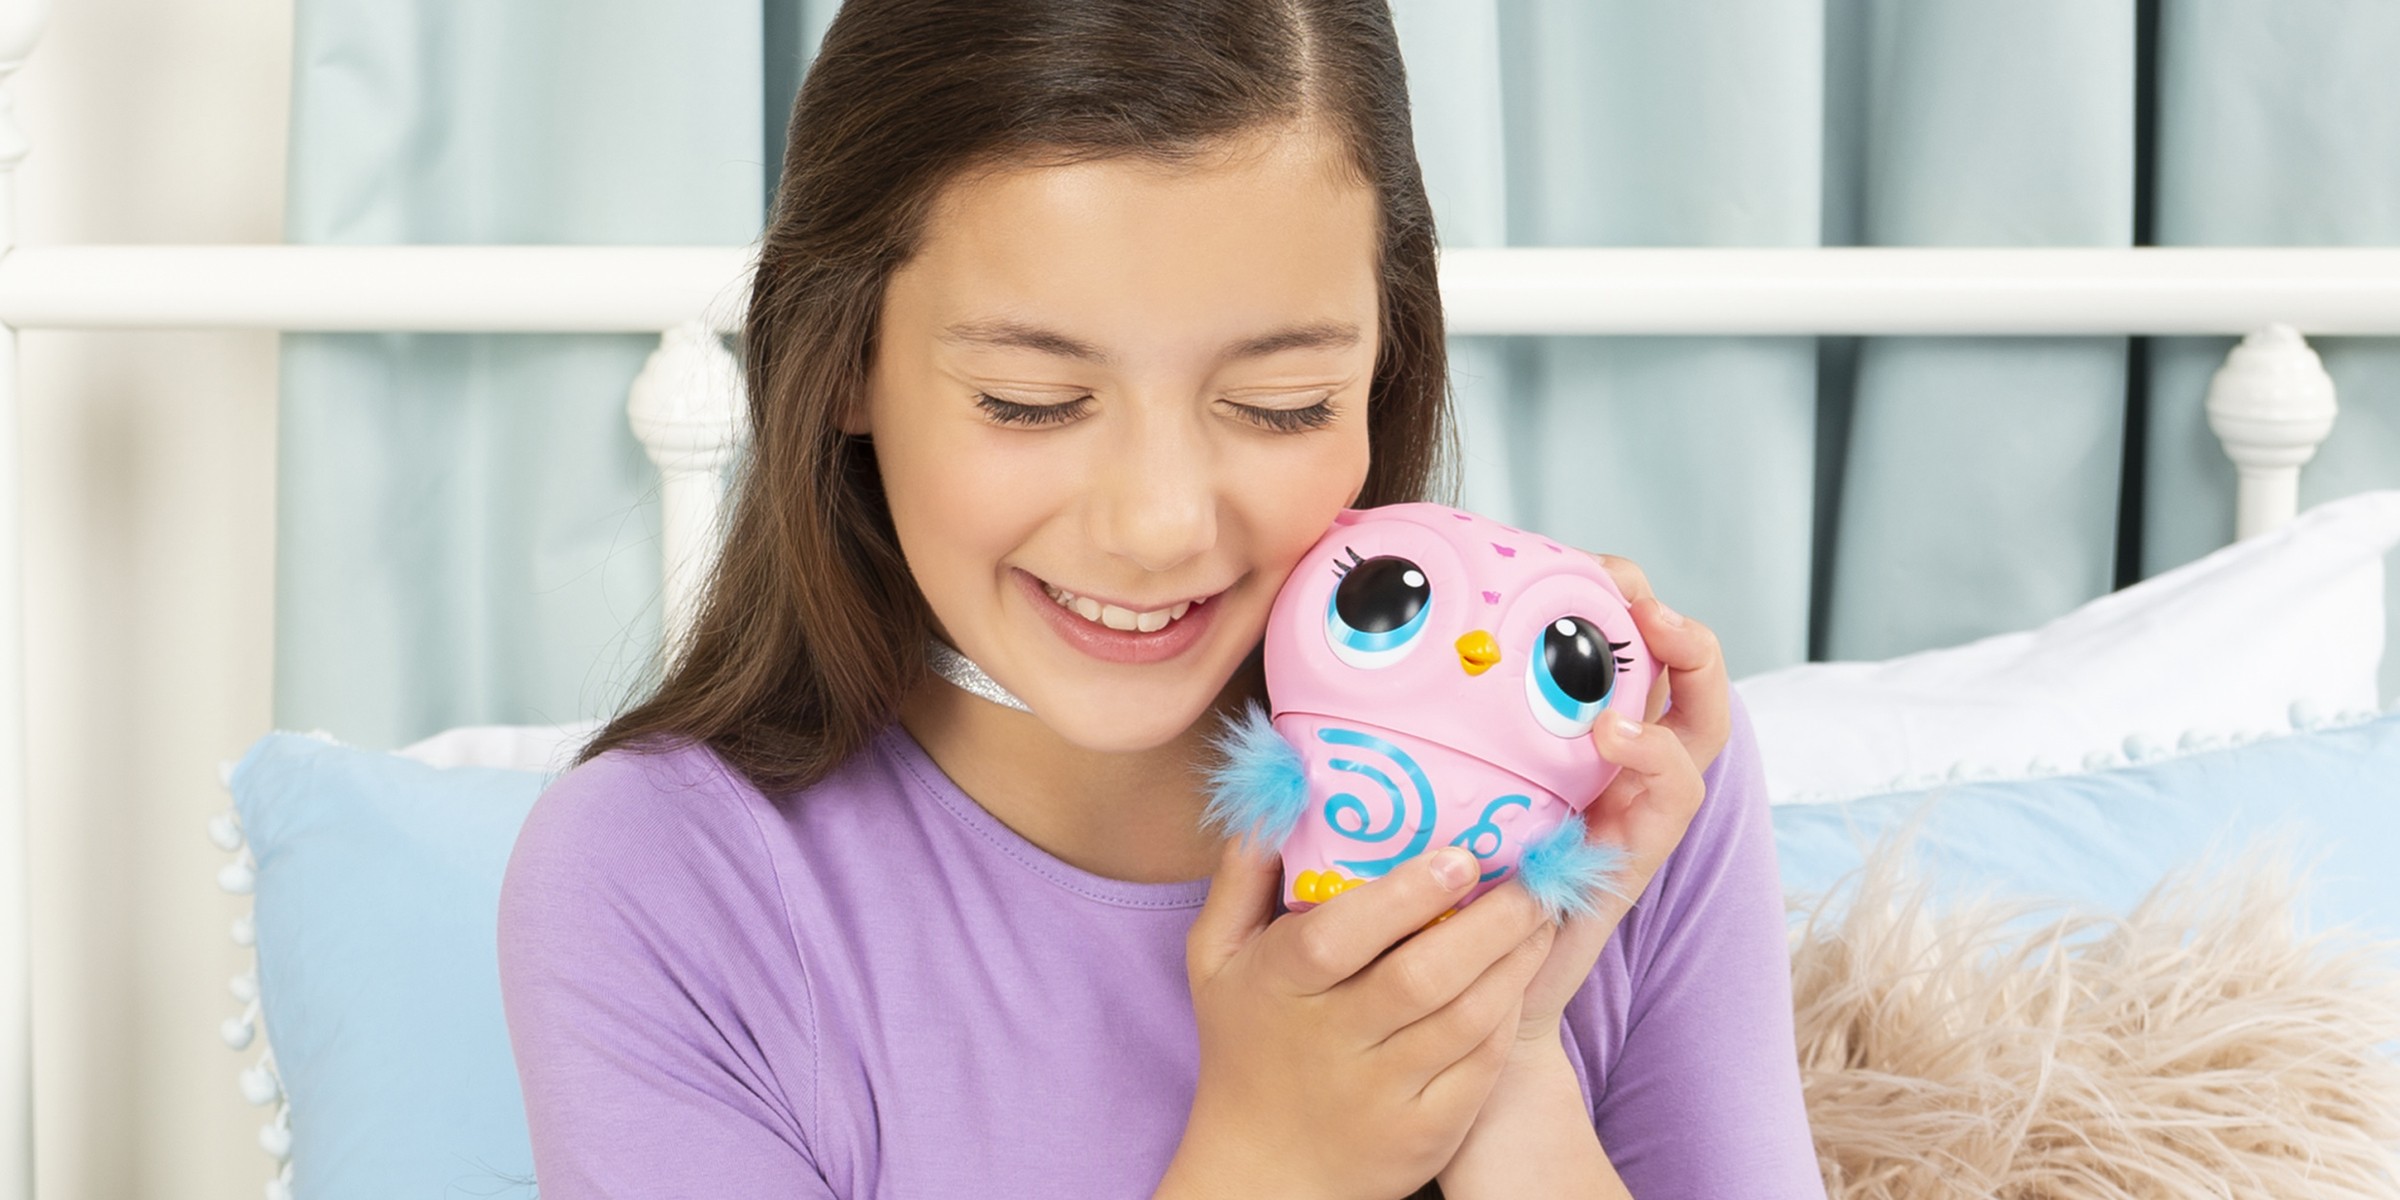 5 Top-Trending Gifts for Kids to Give in 2020